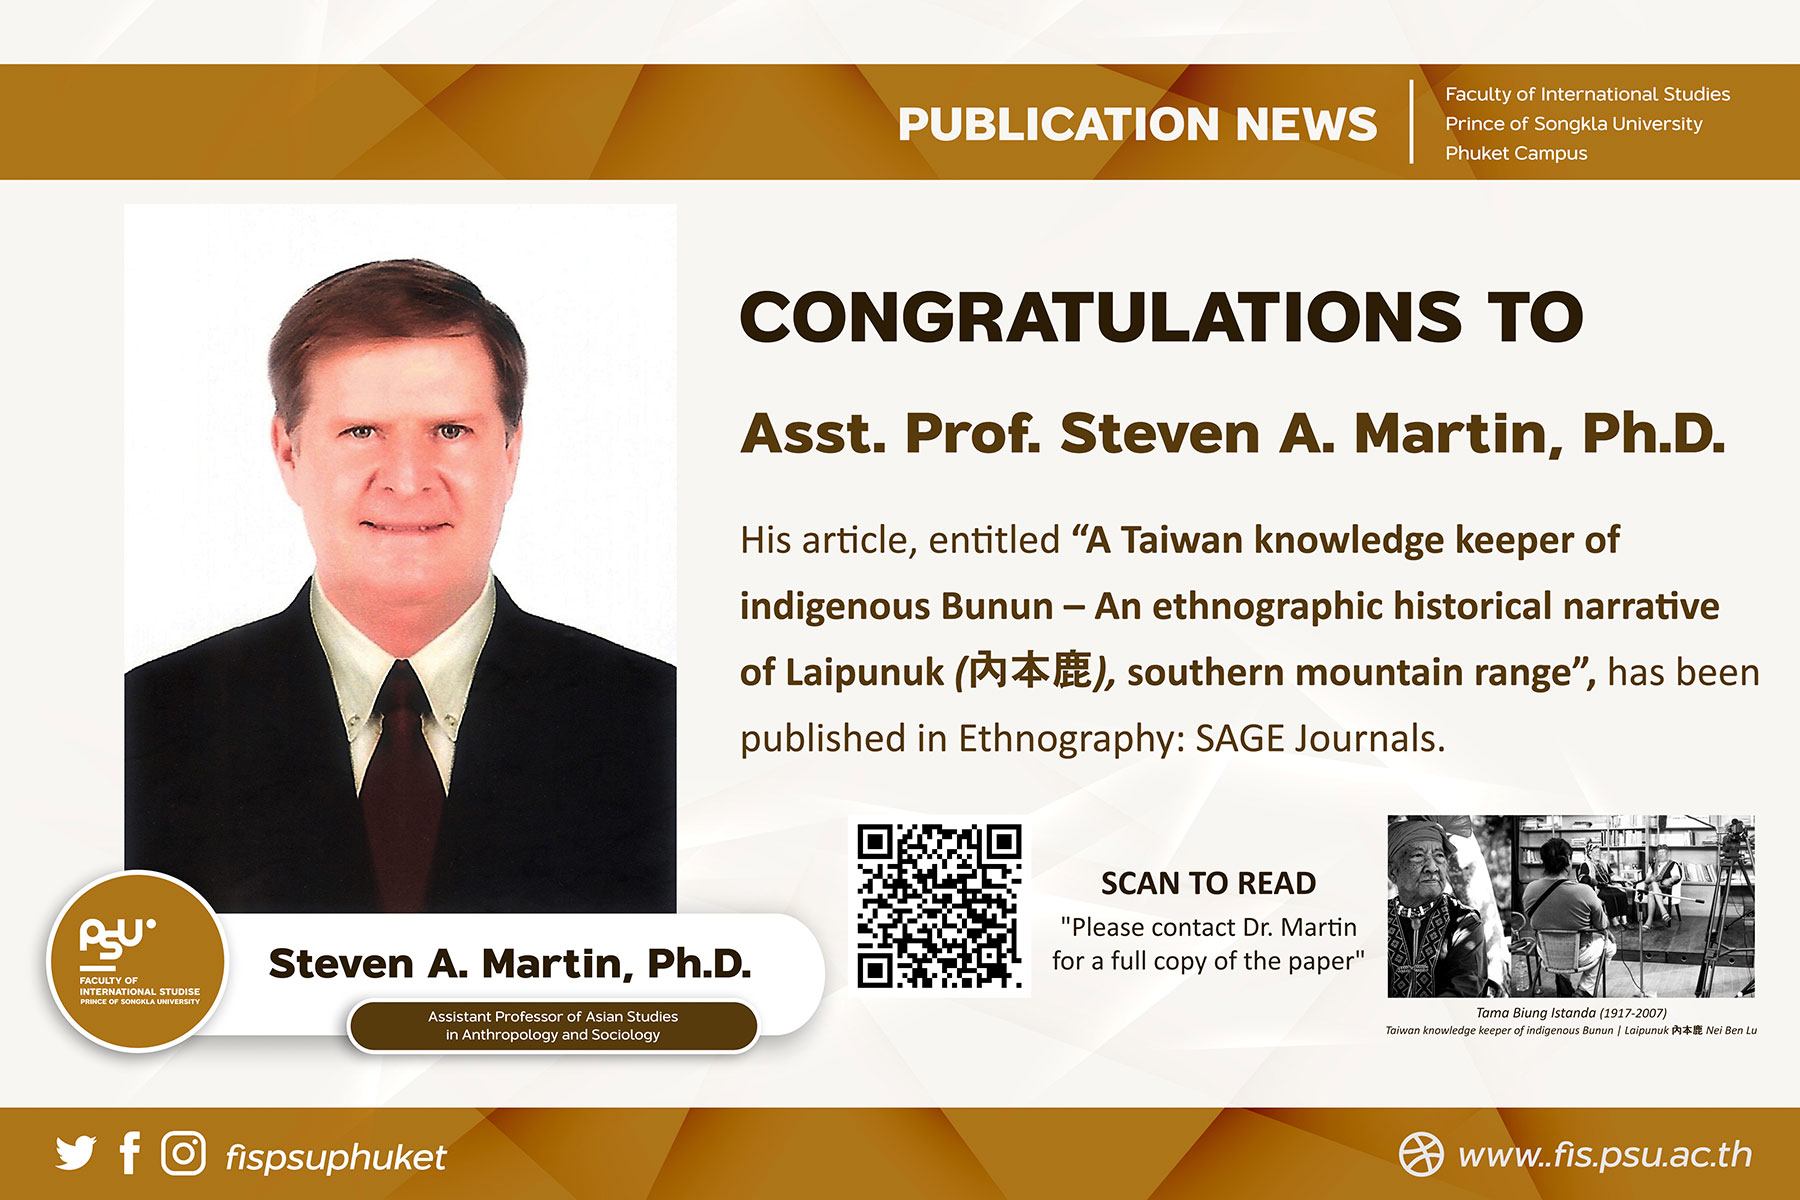 University News | Martin, S. A. (2020). A Taiwan knowledge keeper of indigenous Bunun – An ethnographic historical narrative of Laipunuk (內本鹿), southern mountain range. Ethnography